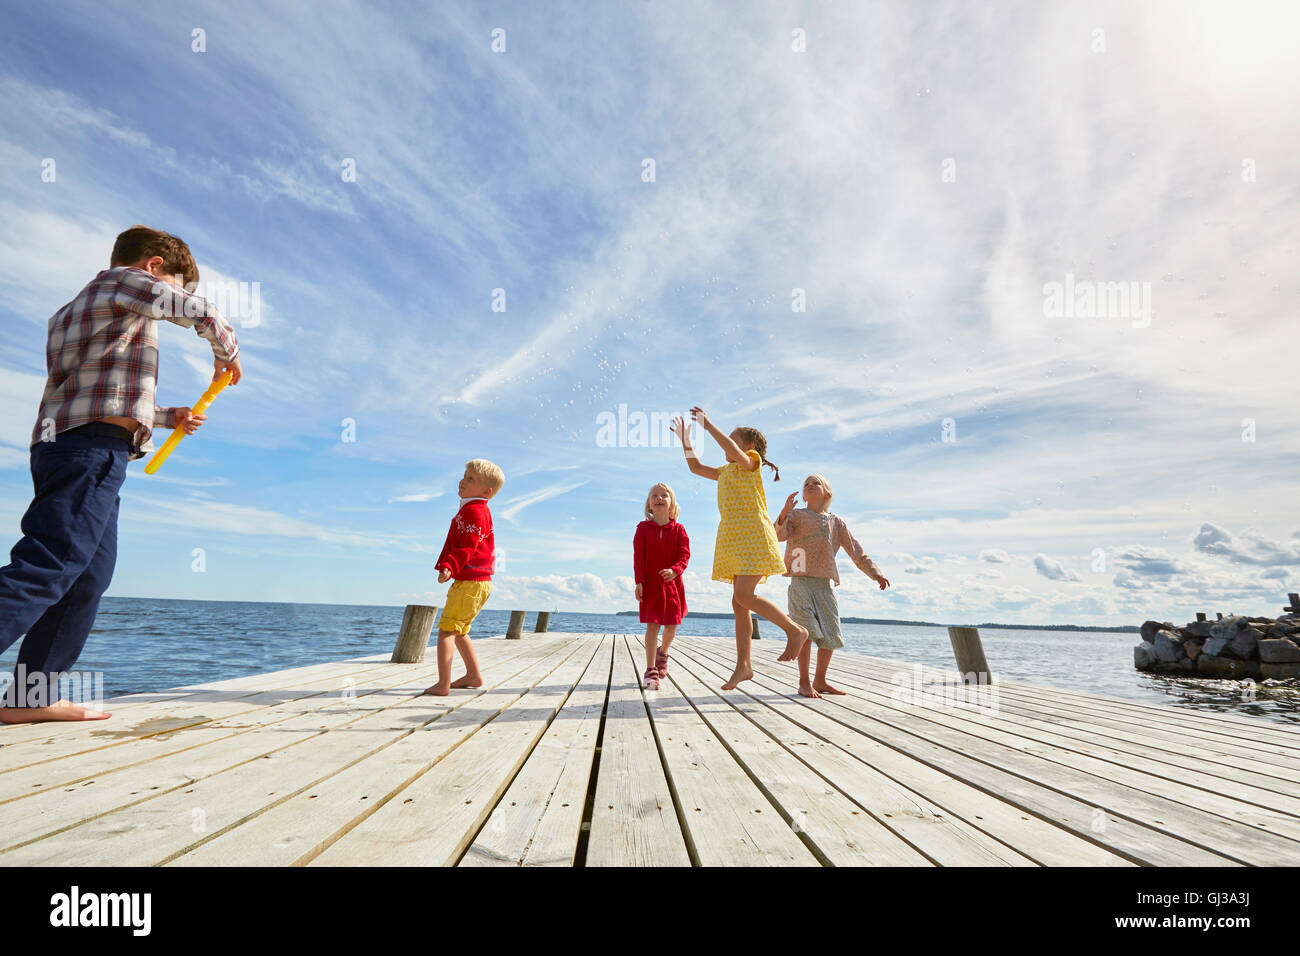 Group of young friends playing on wooden pier Stock Photo